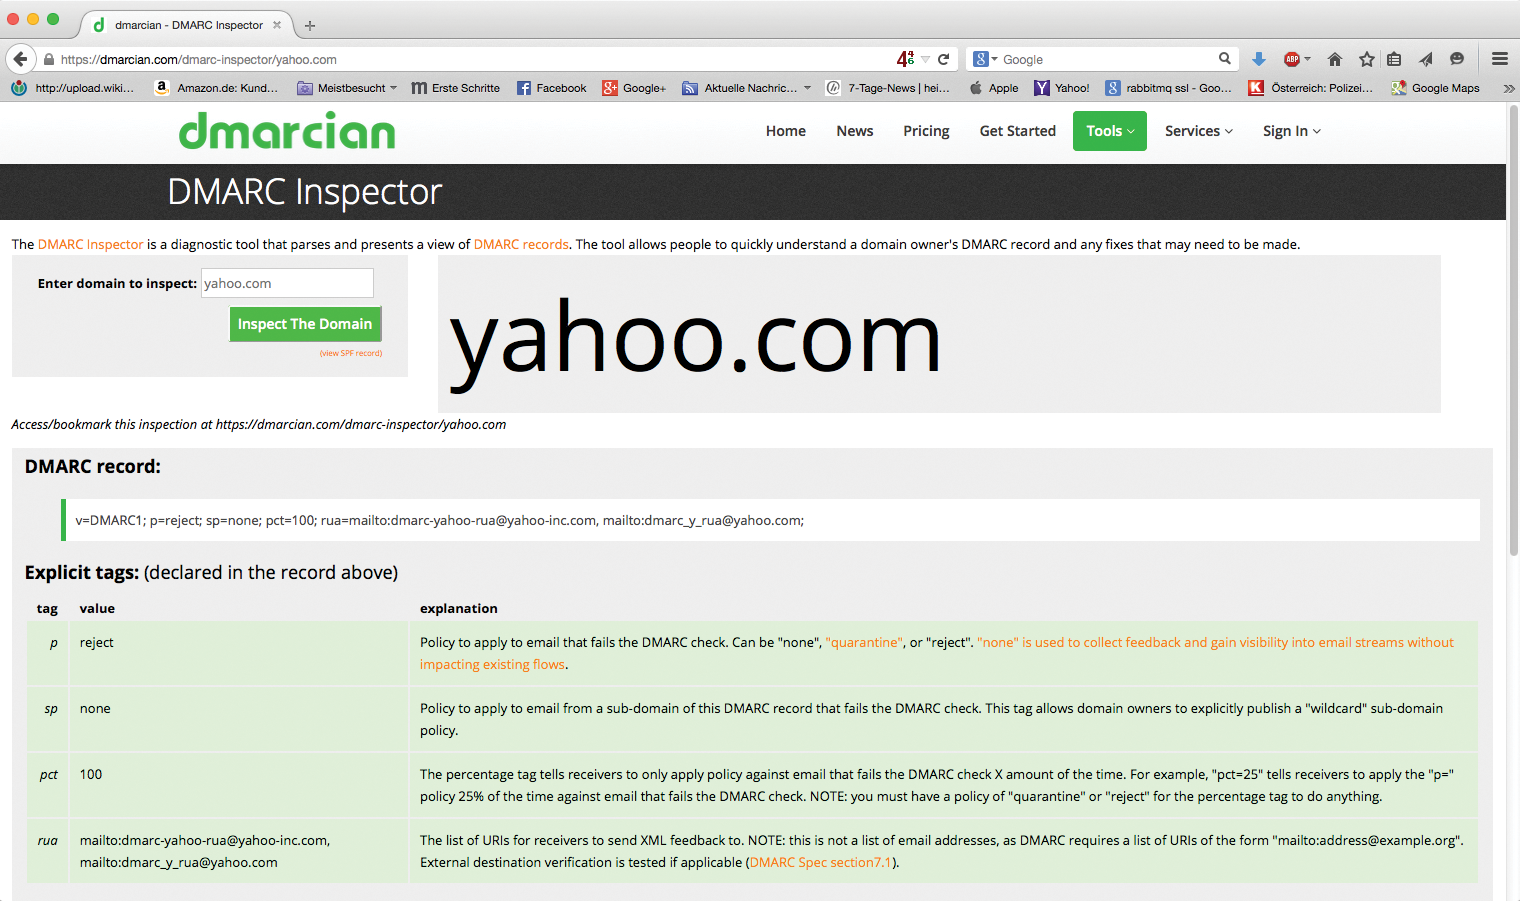 When it comes to spam, Yahoo is merciless. Whoever fails DKIM and SPF is locked out. 